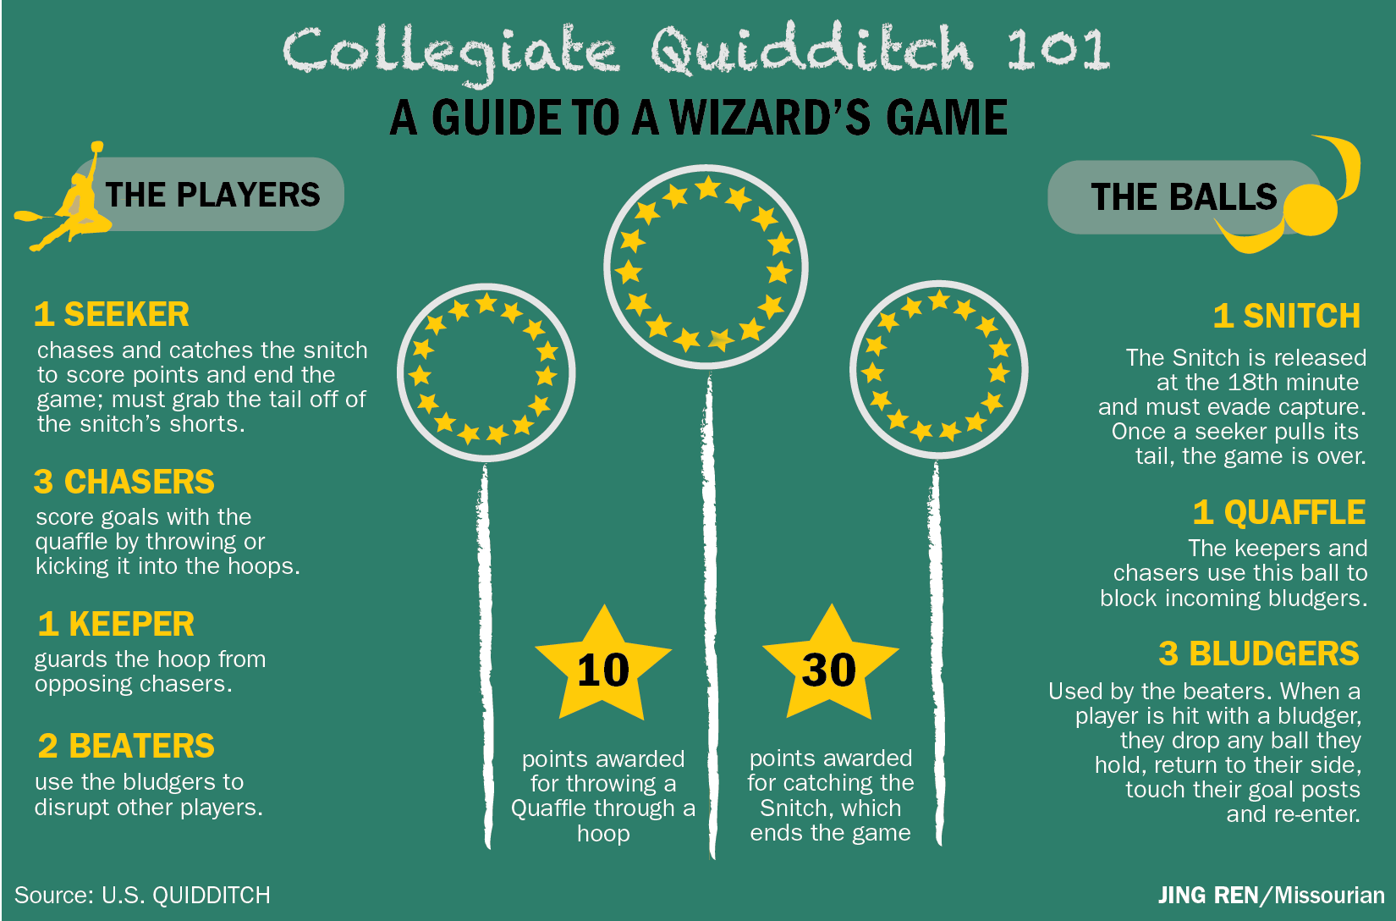 A blagger's guide to Quidditch